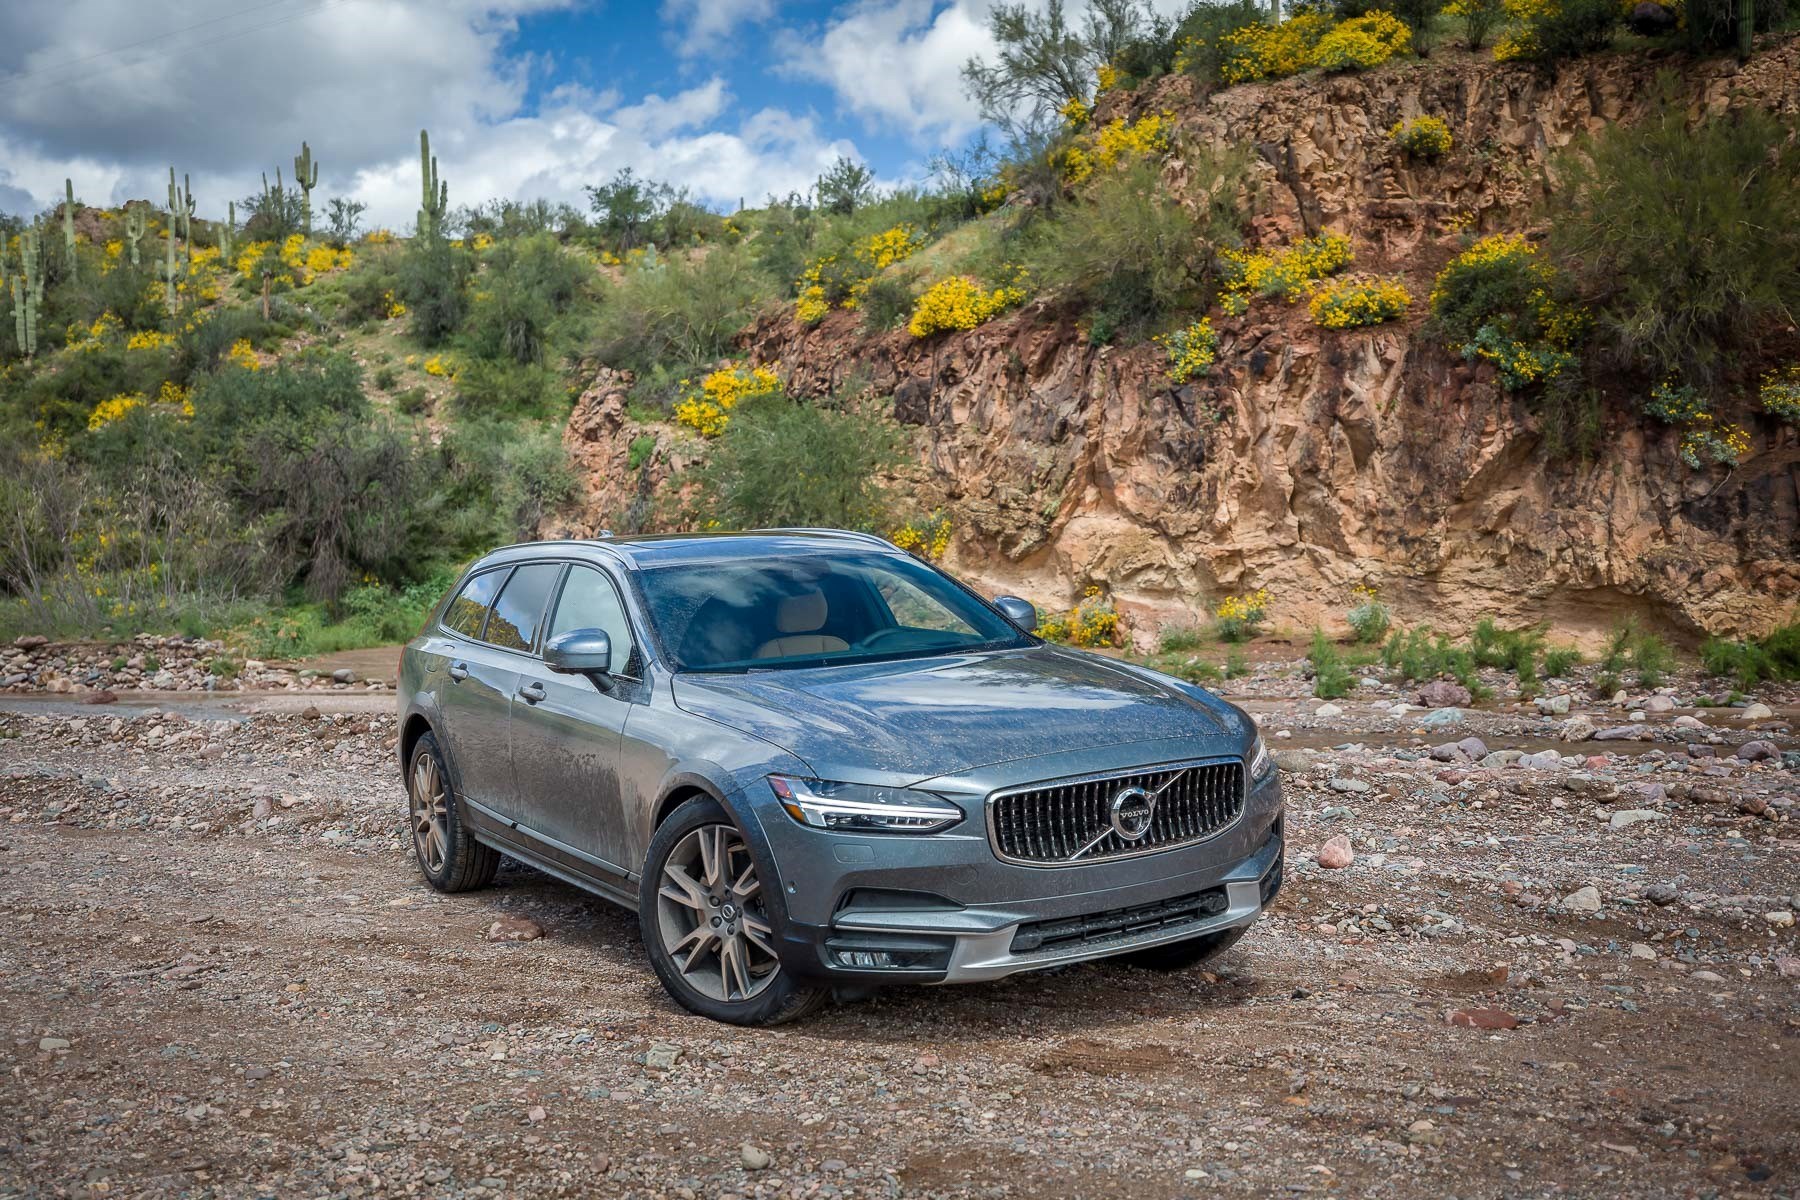 What's New With the 2021 Volvo V90?